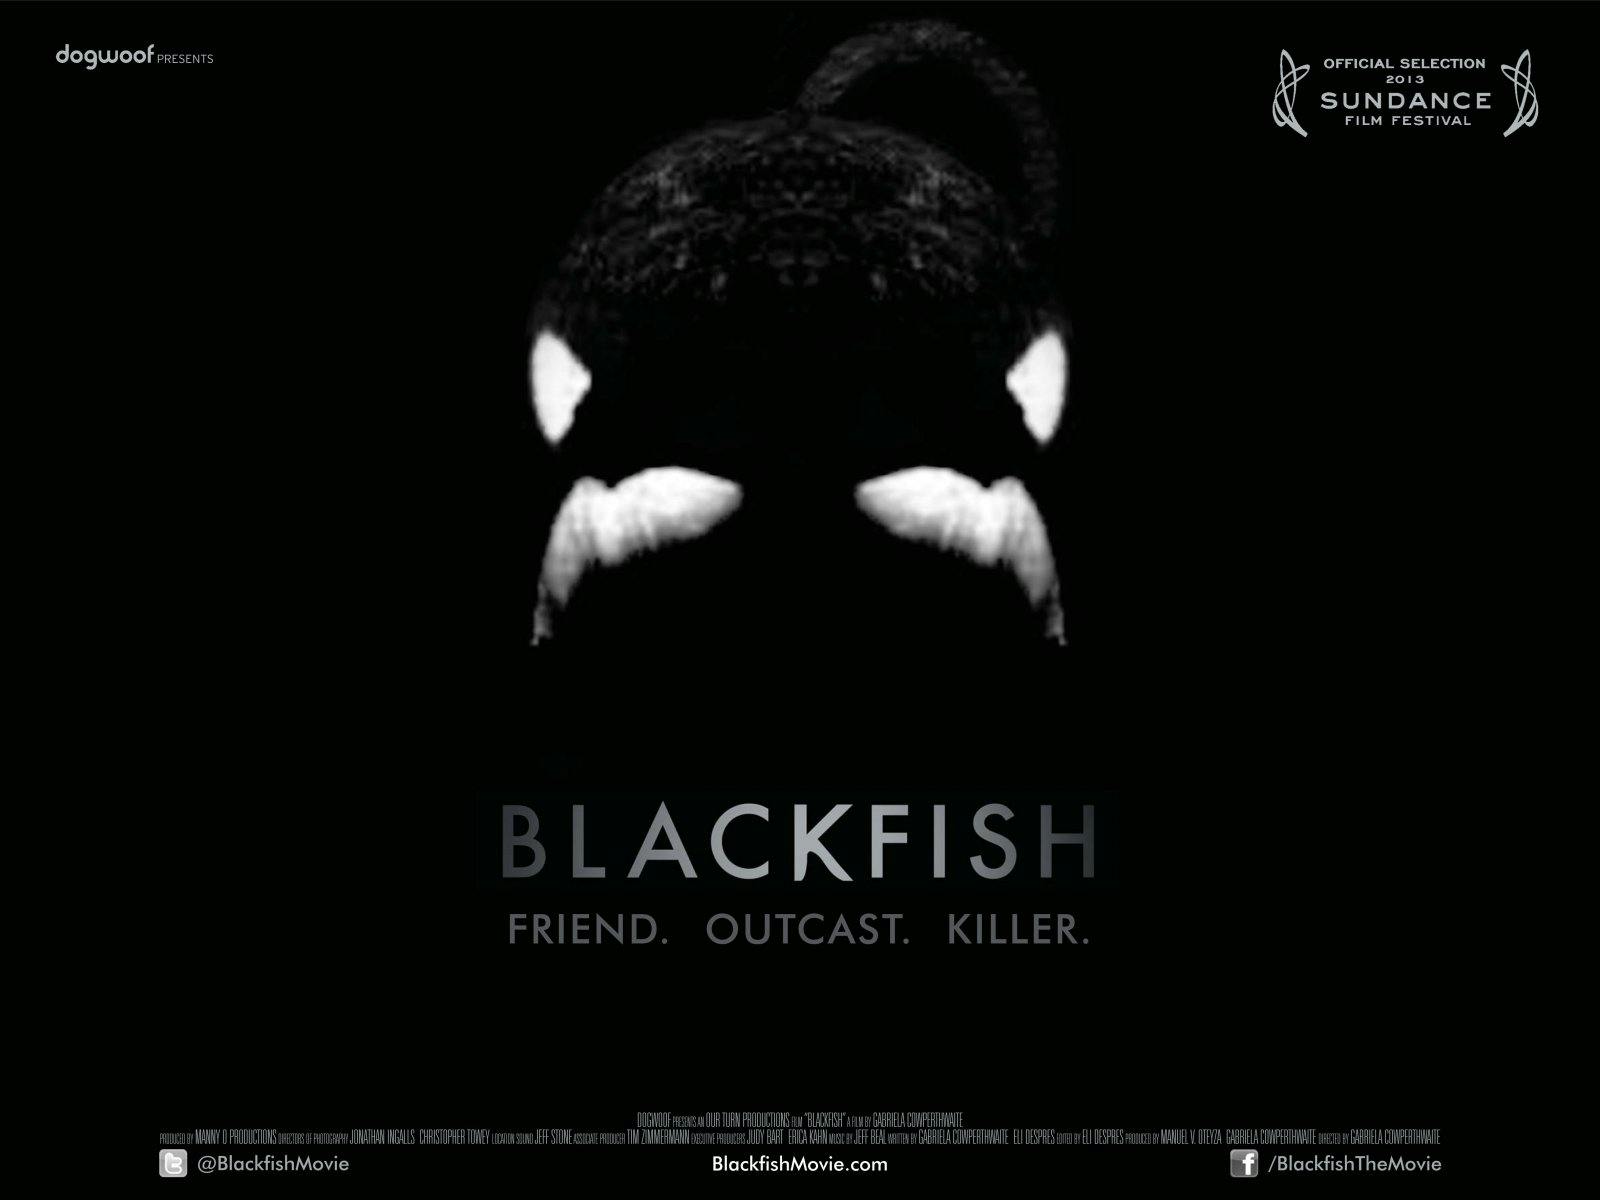 Movie poster for Blackfish a Documentary about the Orca Whale